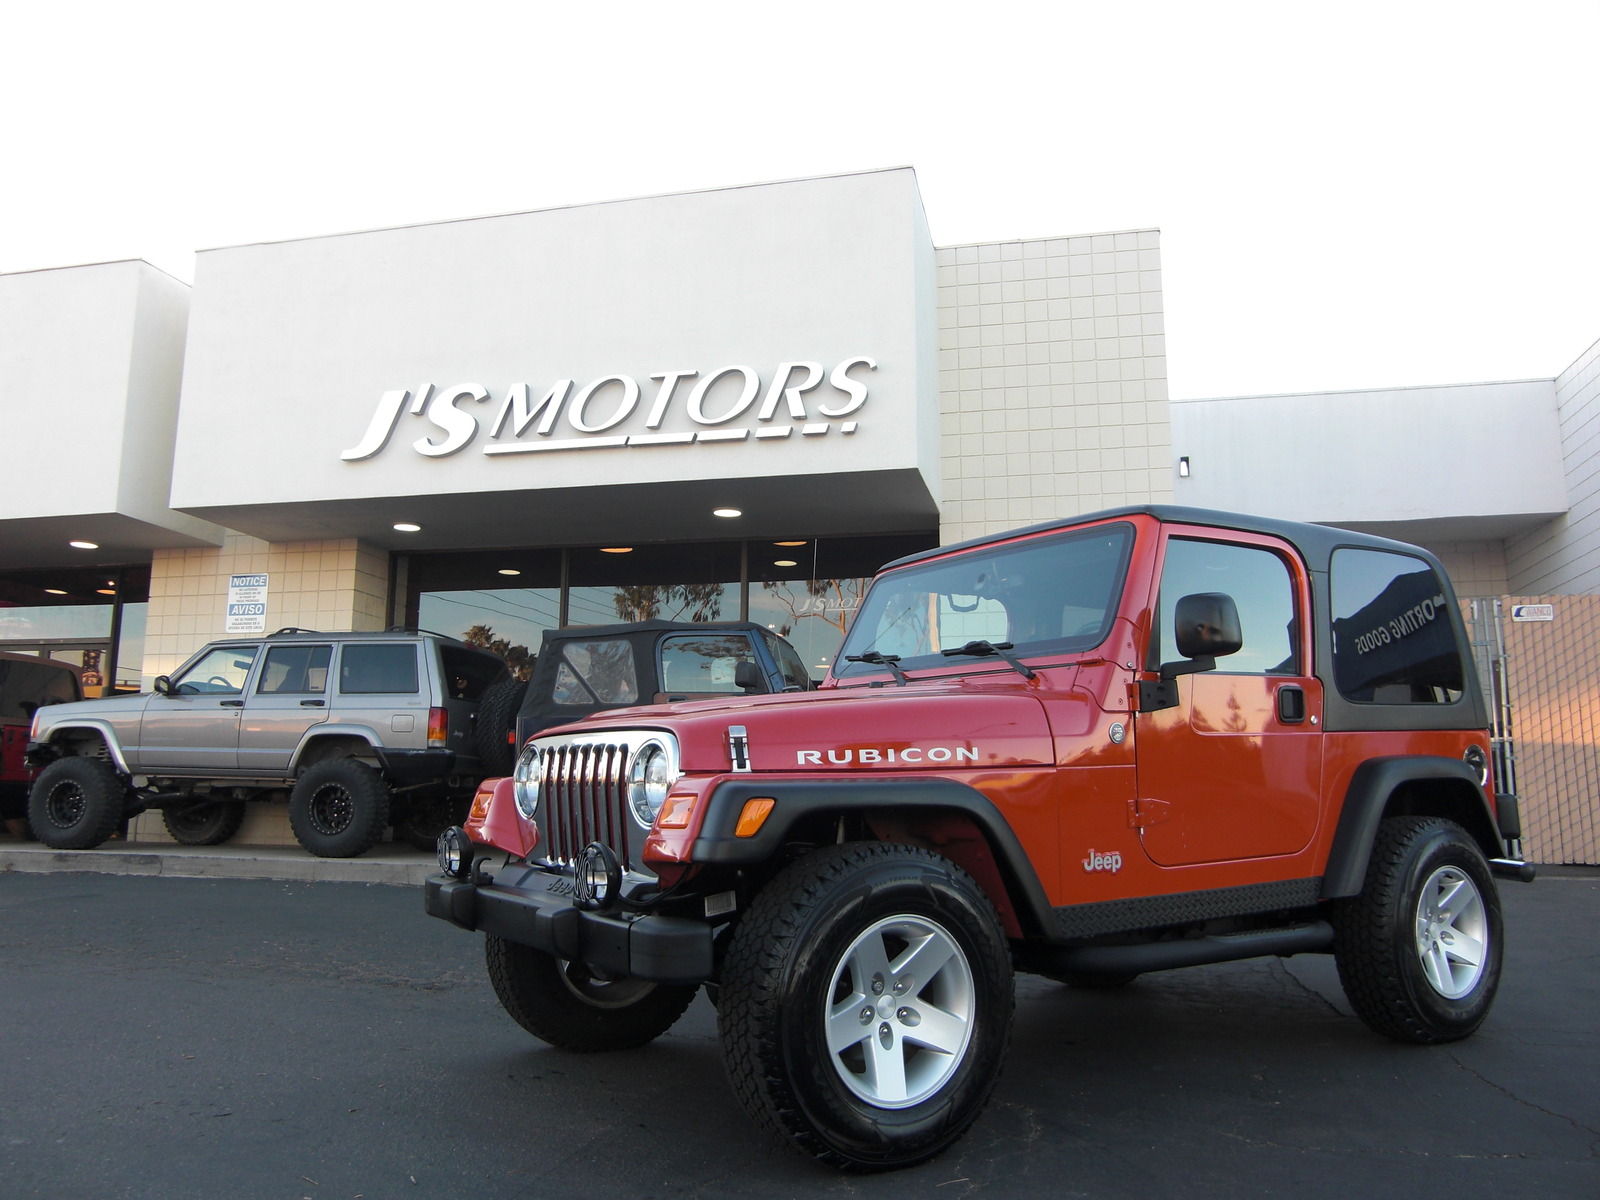 Used 2005 Jeep Wrangler for Sale Right Now - Autotrader